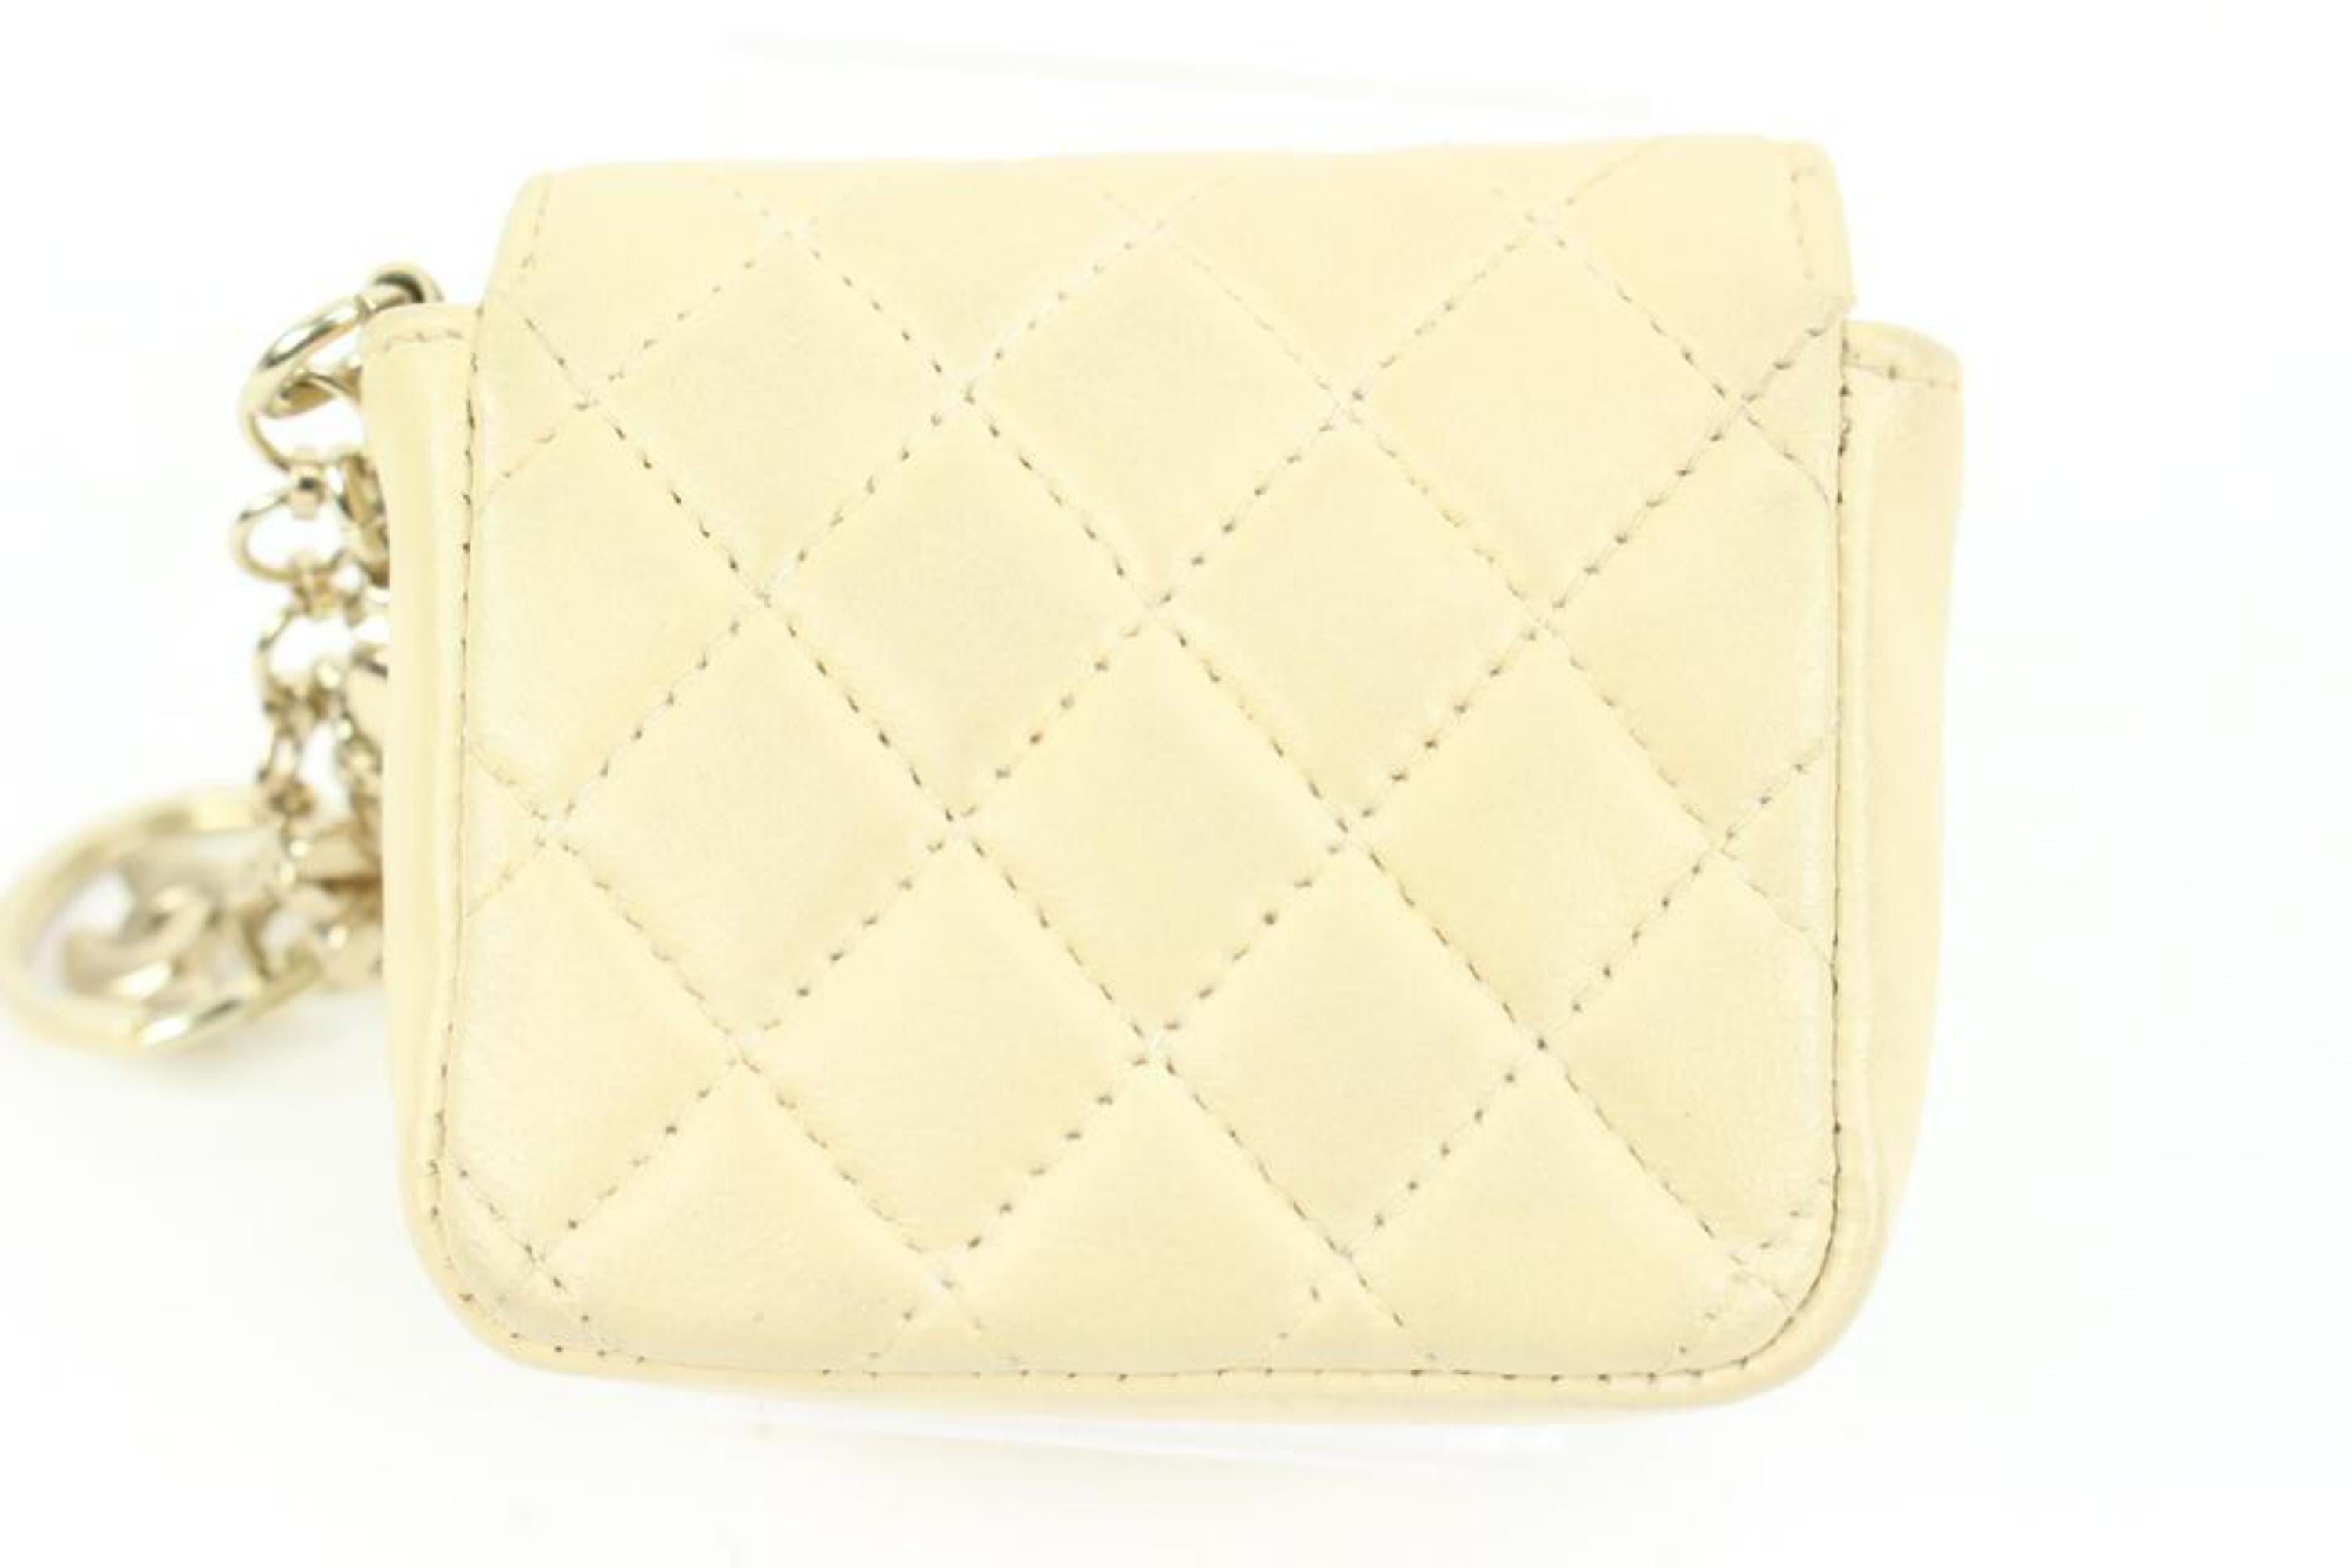 Chanel Light Beige Cream Quilted Leather Micro Flap Charm Bag Mini 48cz47 In Good Condition For Sale In Dix hills, NY